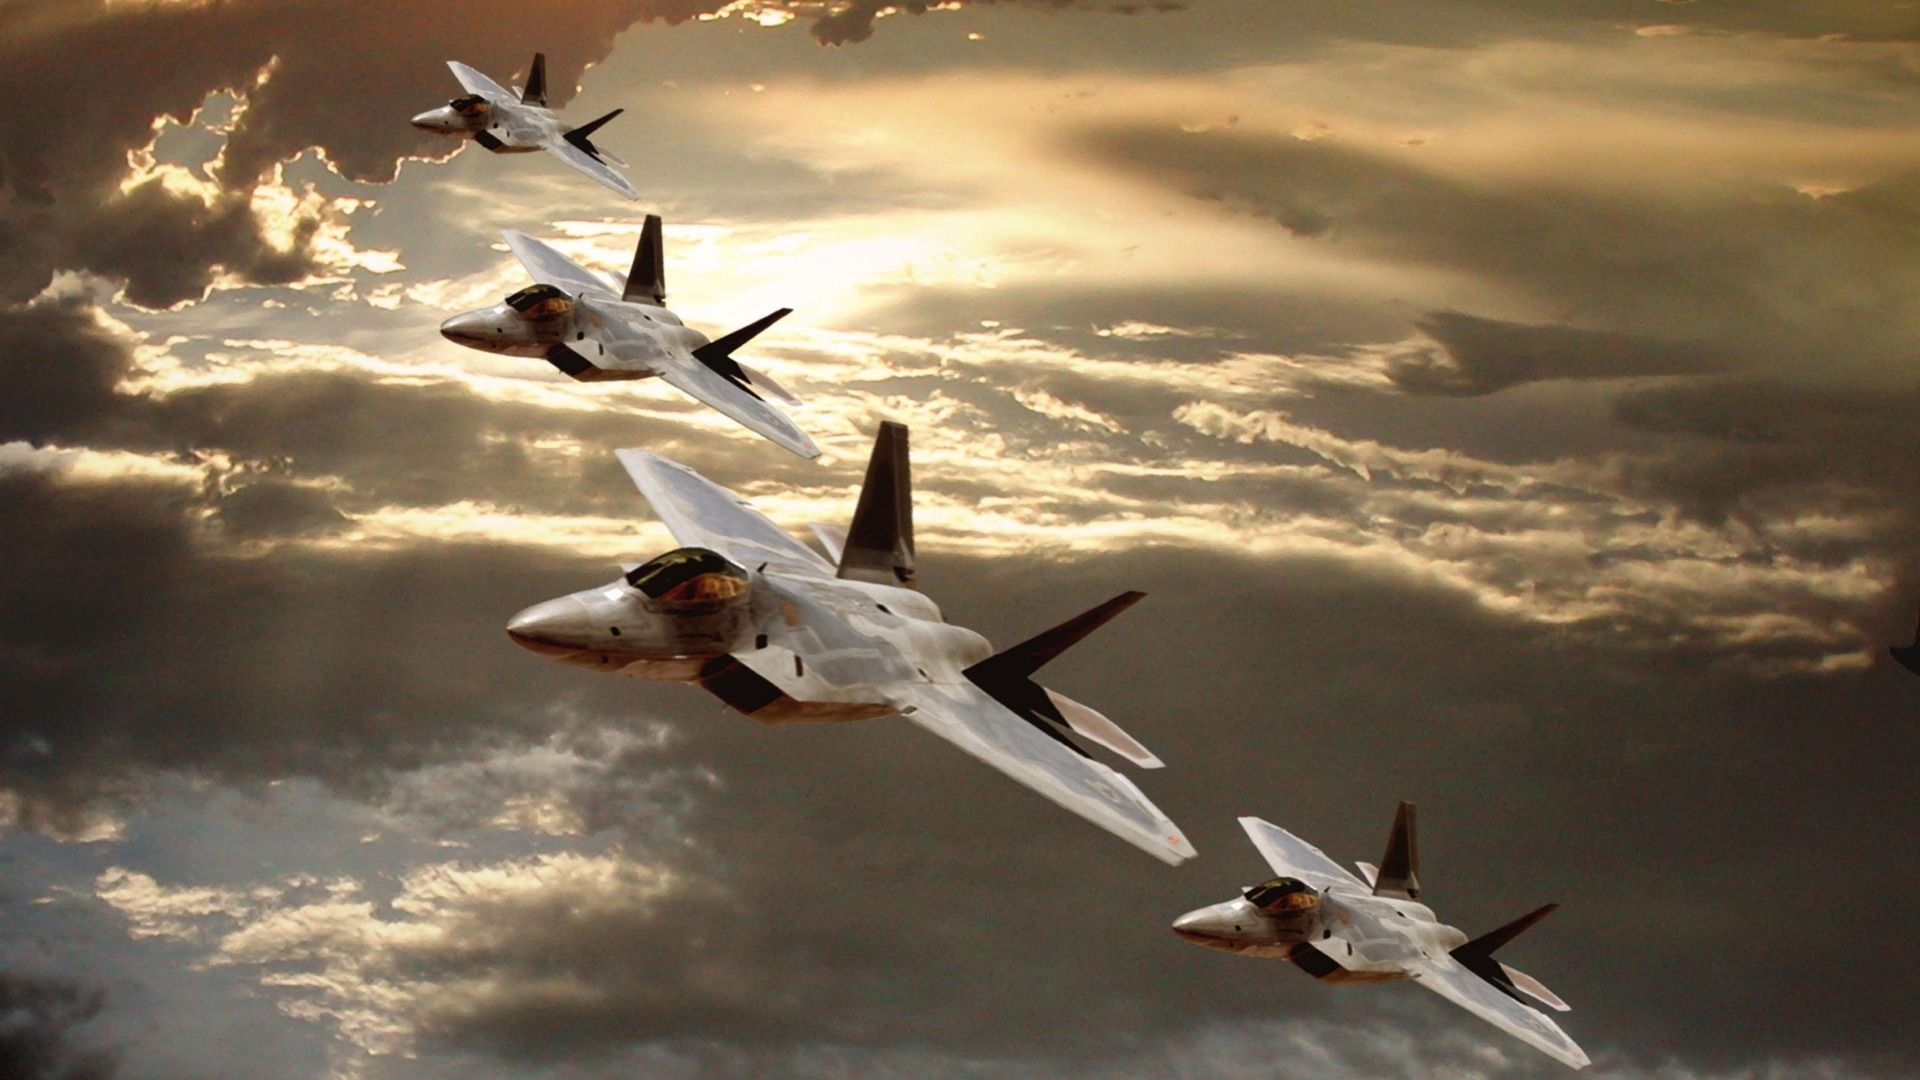 us air force wallpaper,airplane,aircraft,vehicle,military aircraft,fighter aircraft